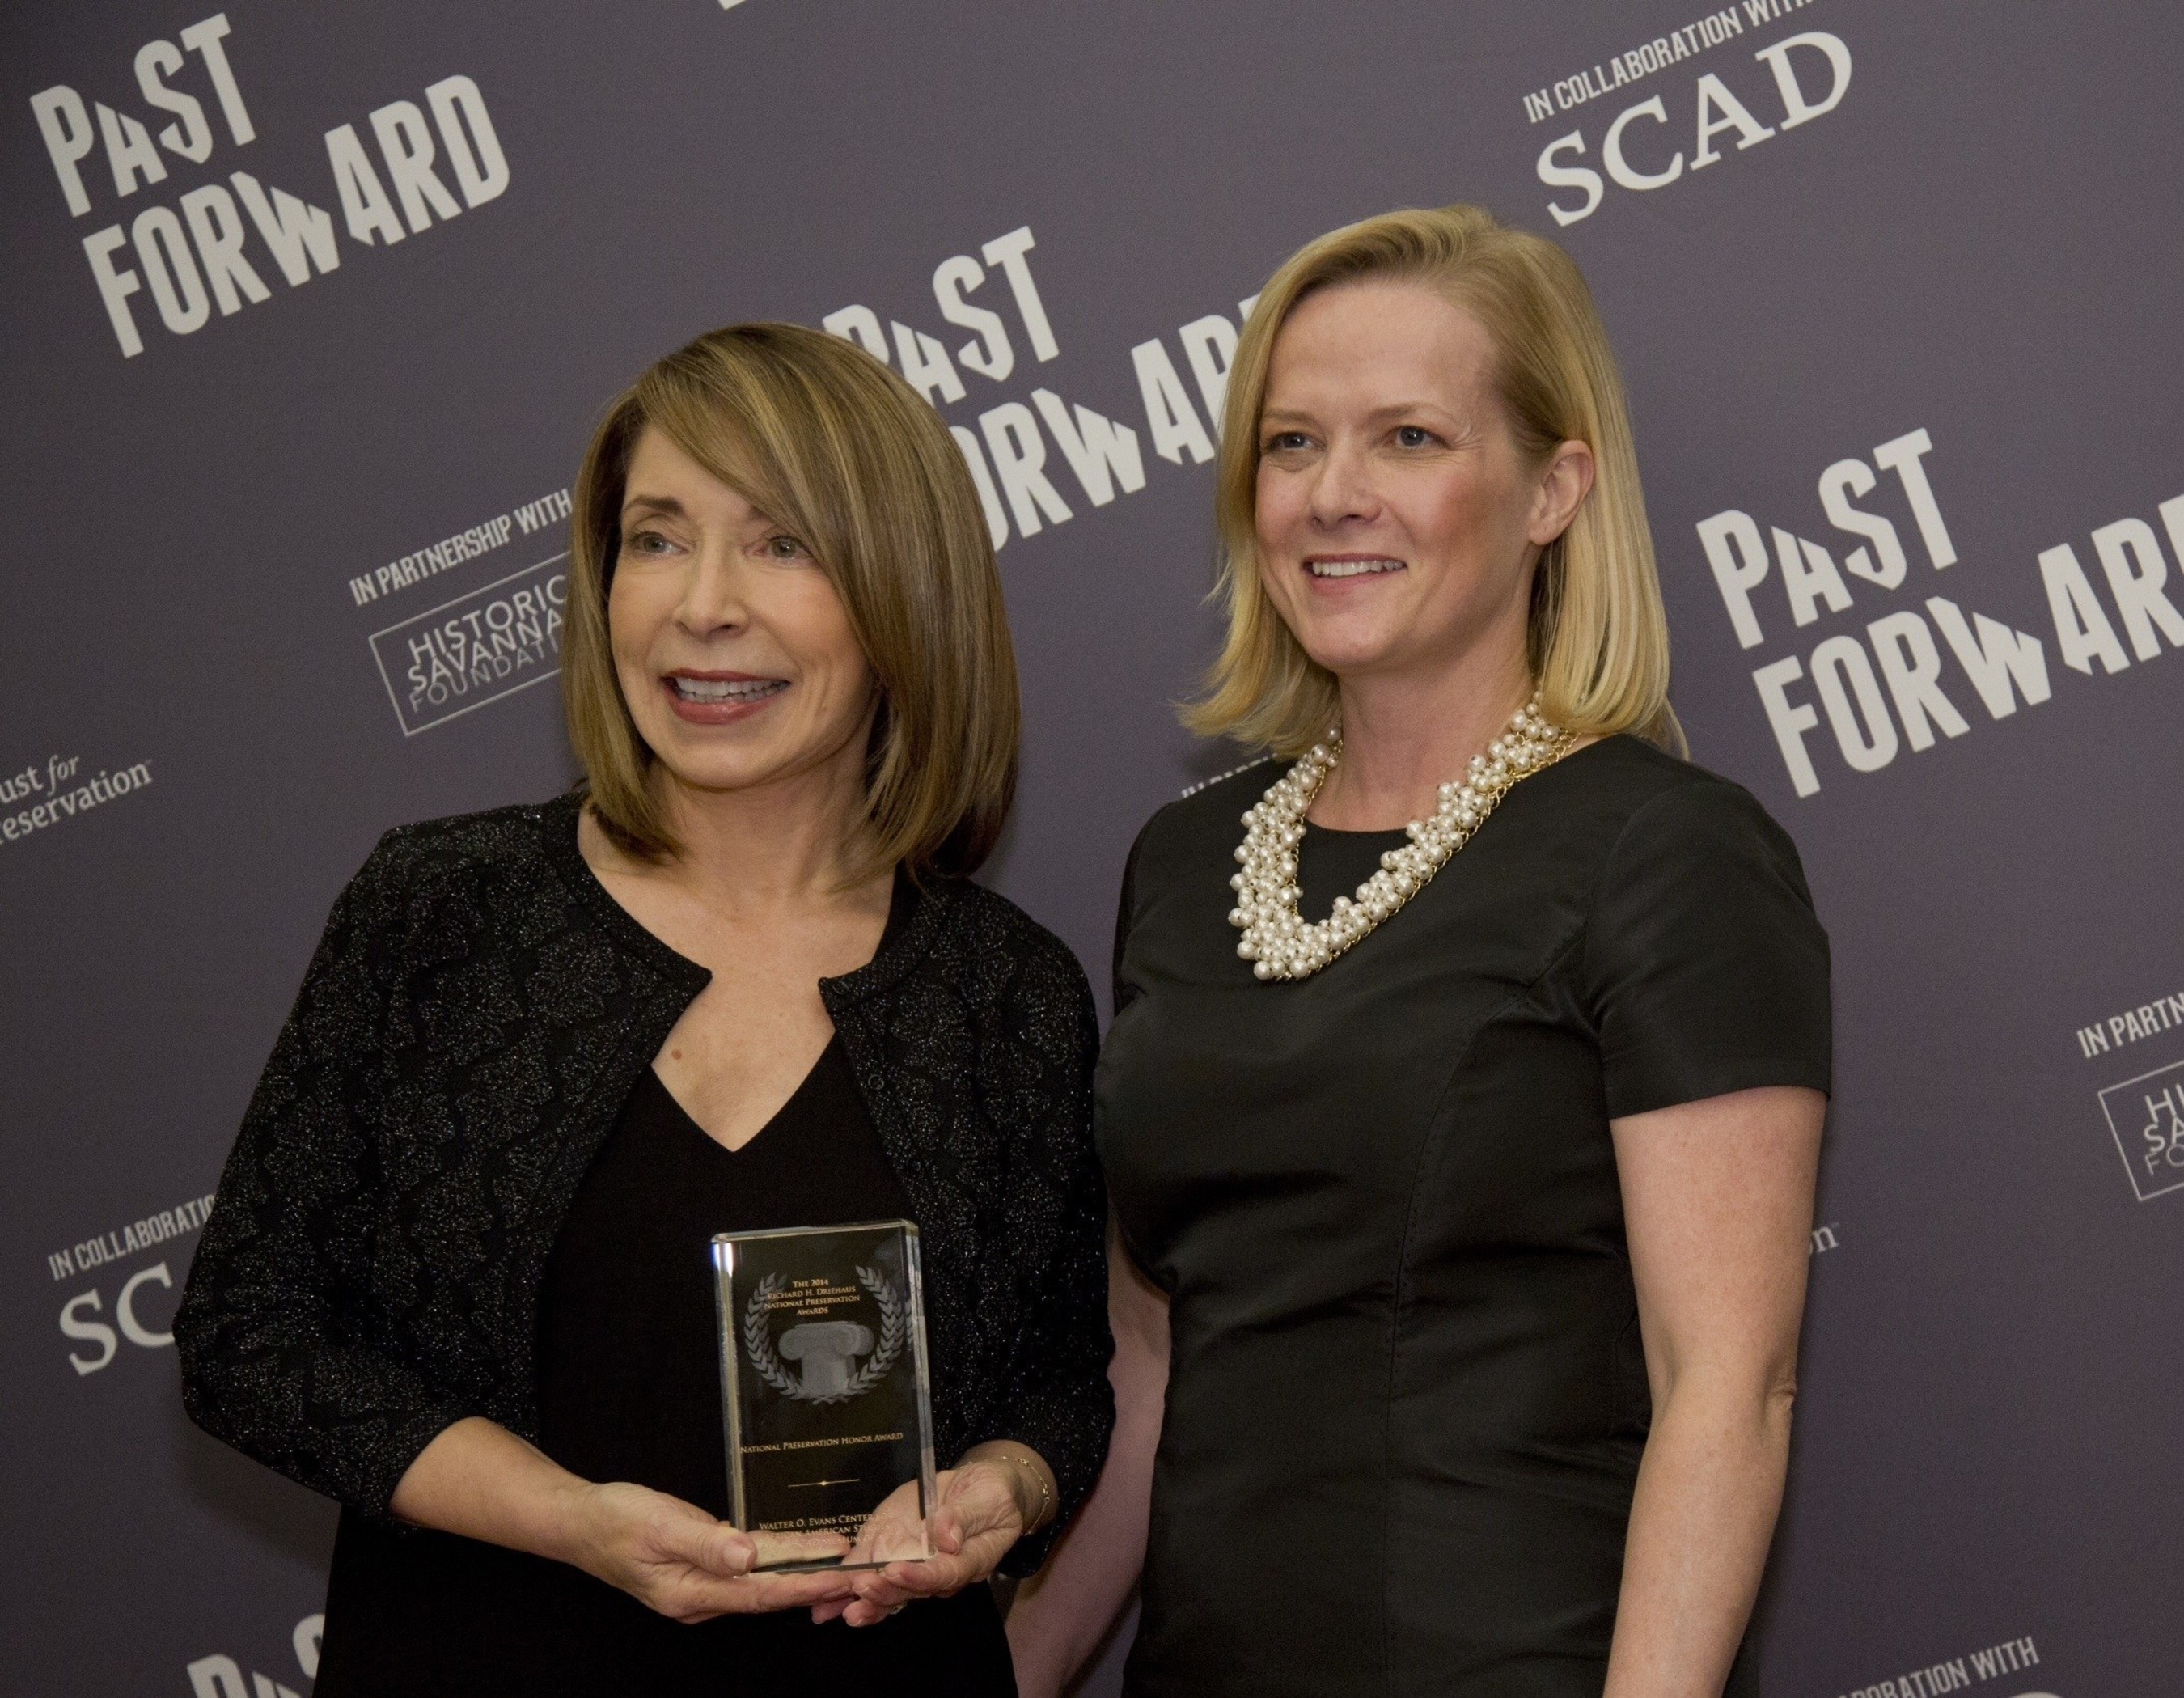 Paula Wallace, SCAD president and founder, with Stephanie Meeks, president and chief executive officer National Trust for Historic Preservation, at the 2014 Richard H. Driehaus National Preservation Awards in Savannah, Georgia, on November 13, 2014.